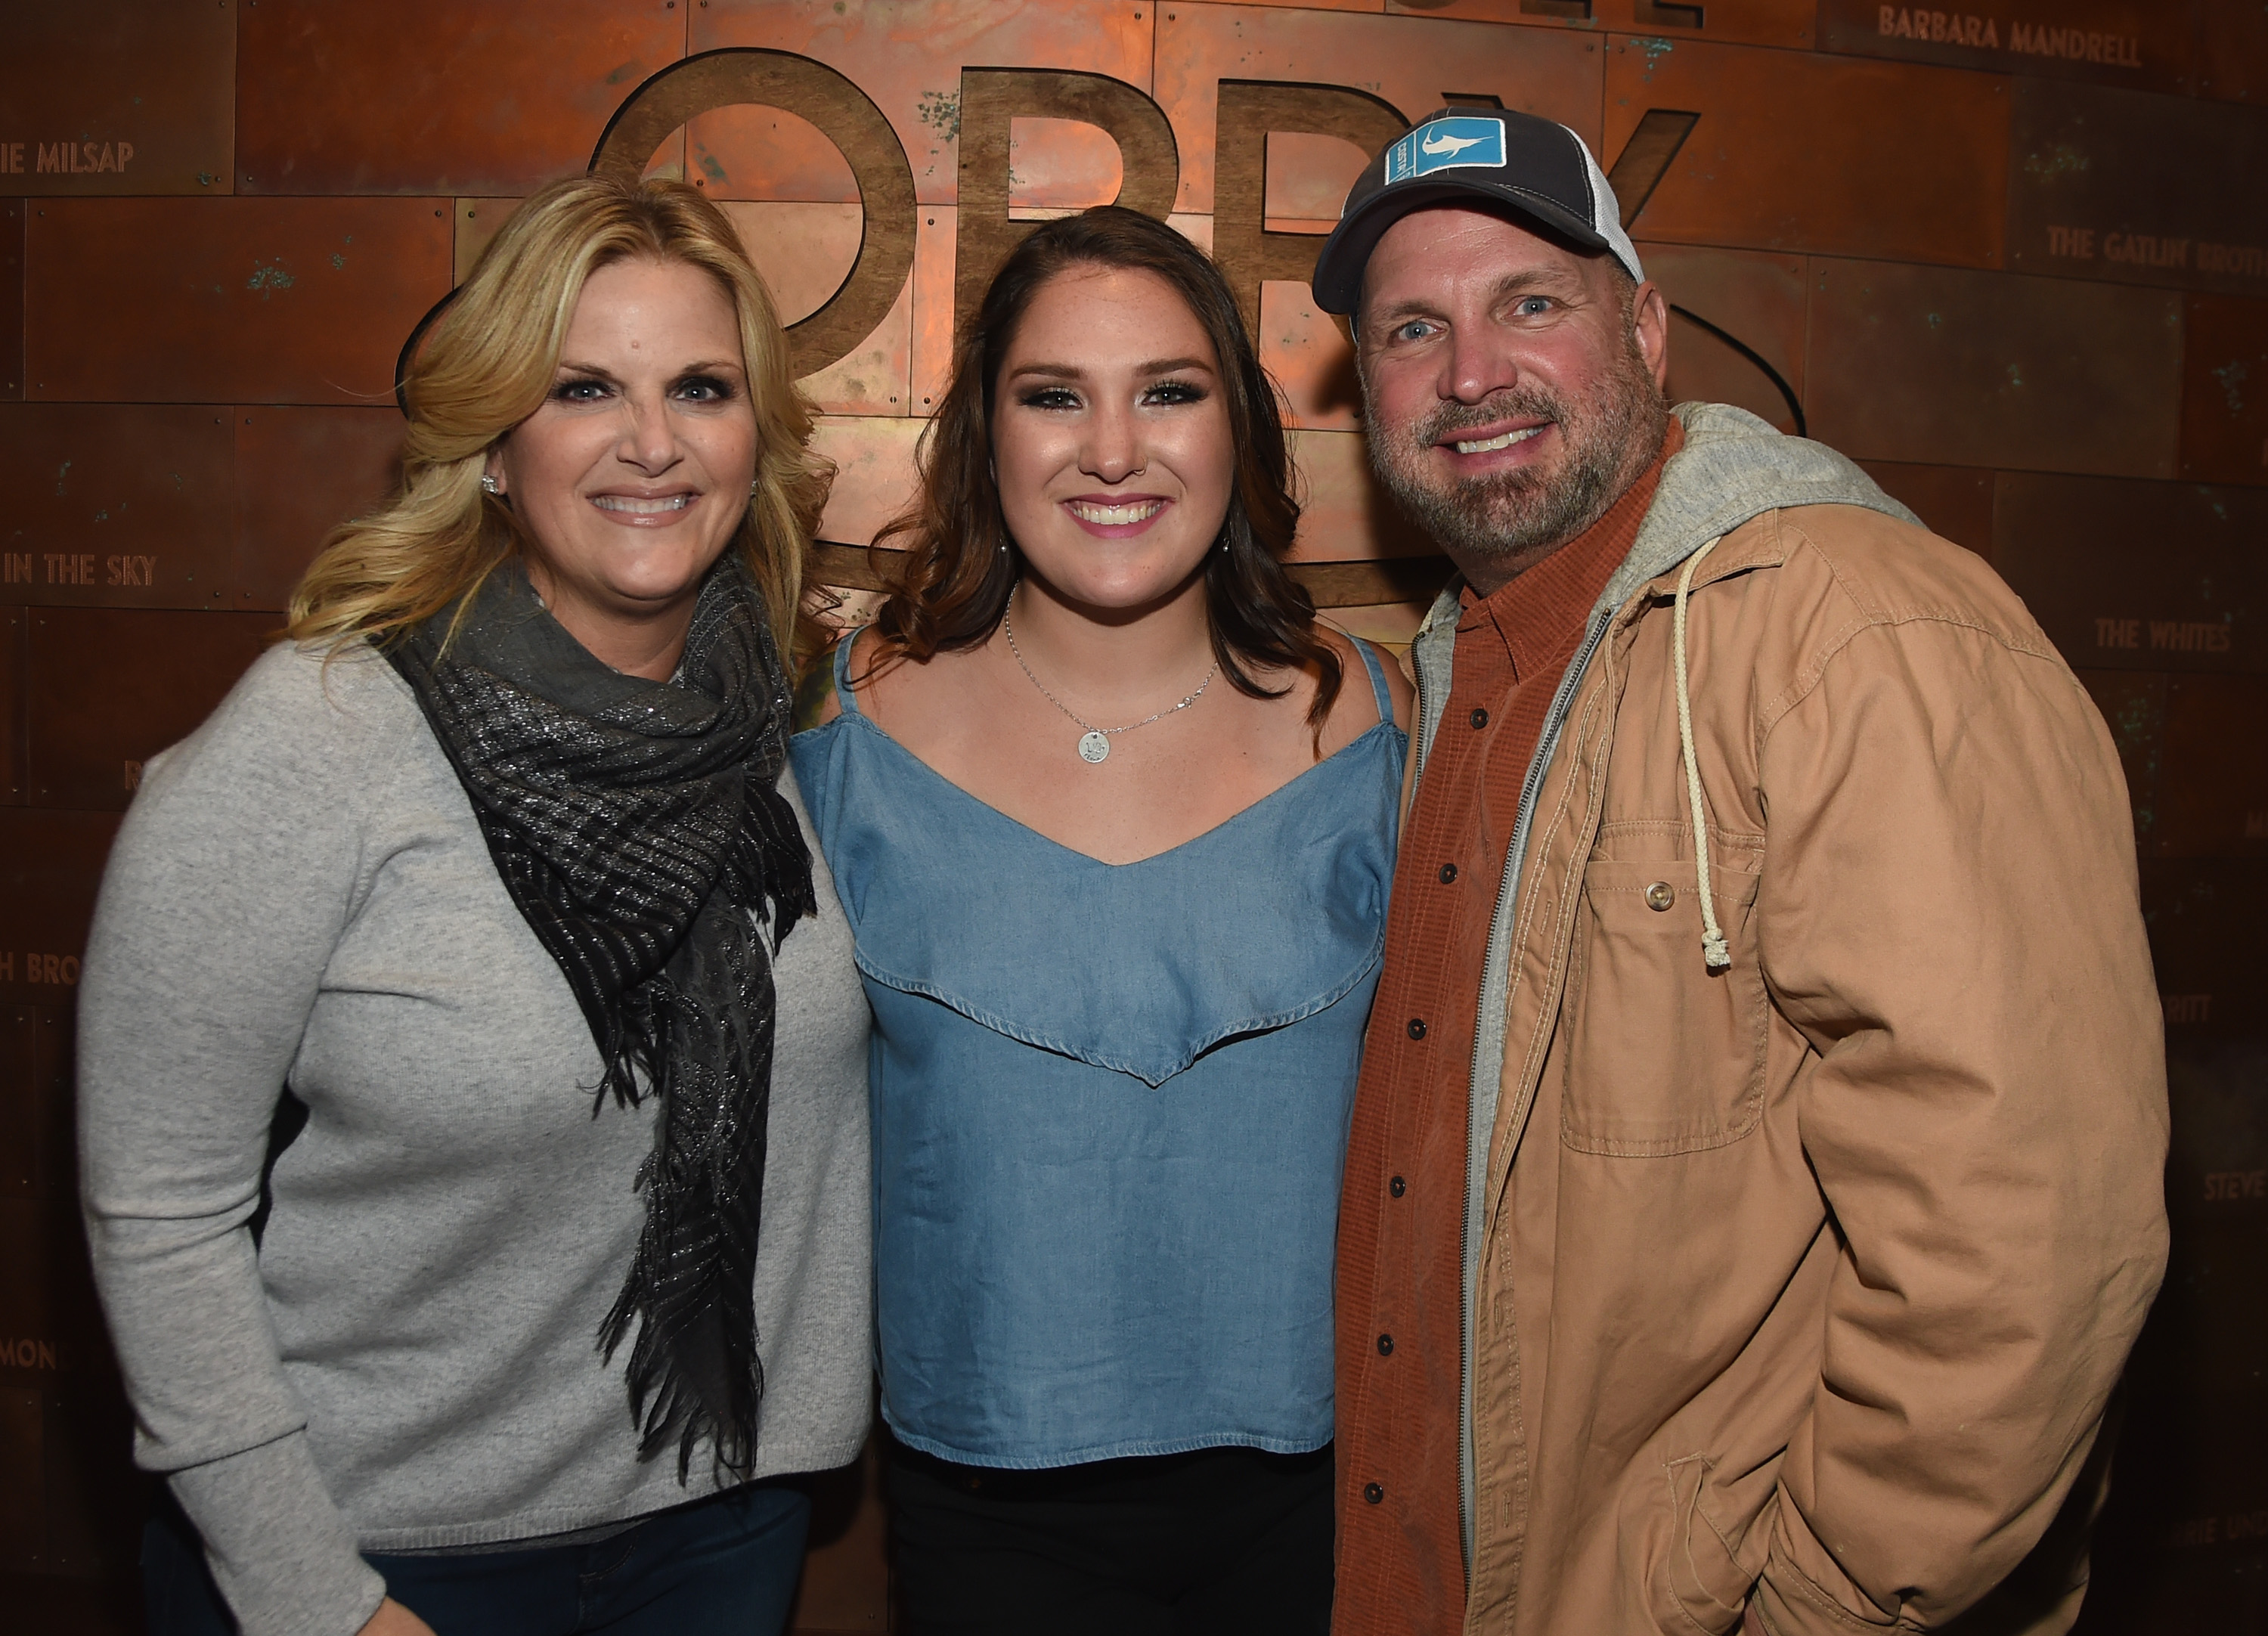 Trisha Yearwood, Allie Colleen Brooks, and Garth Brooks pose together after Allie's Grand Ole Opry debut during Dr. Ralph Stanley Forever: A Special Tribute Concert at Grand Ole Opry House on October 19, 2017, in Nashville, Tennessee. | Source: Getty Images